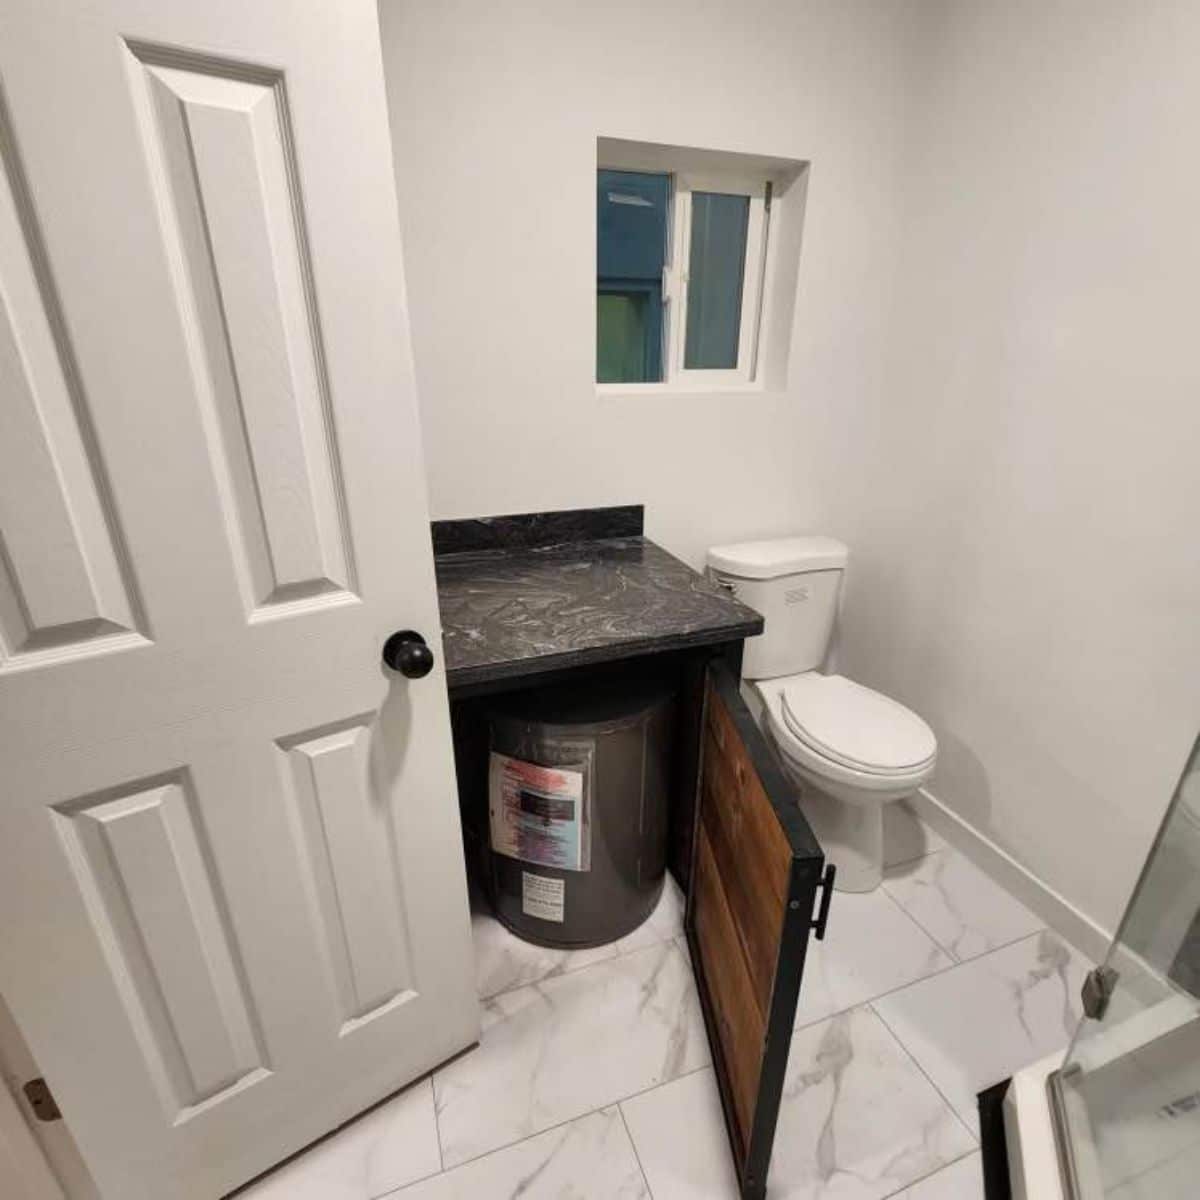 ample space and storage under the sink  in bathroom of beautiful container home